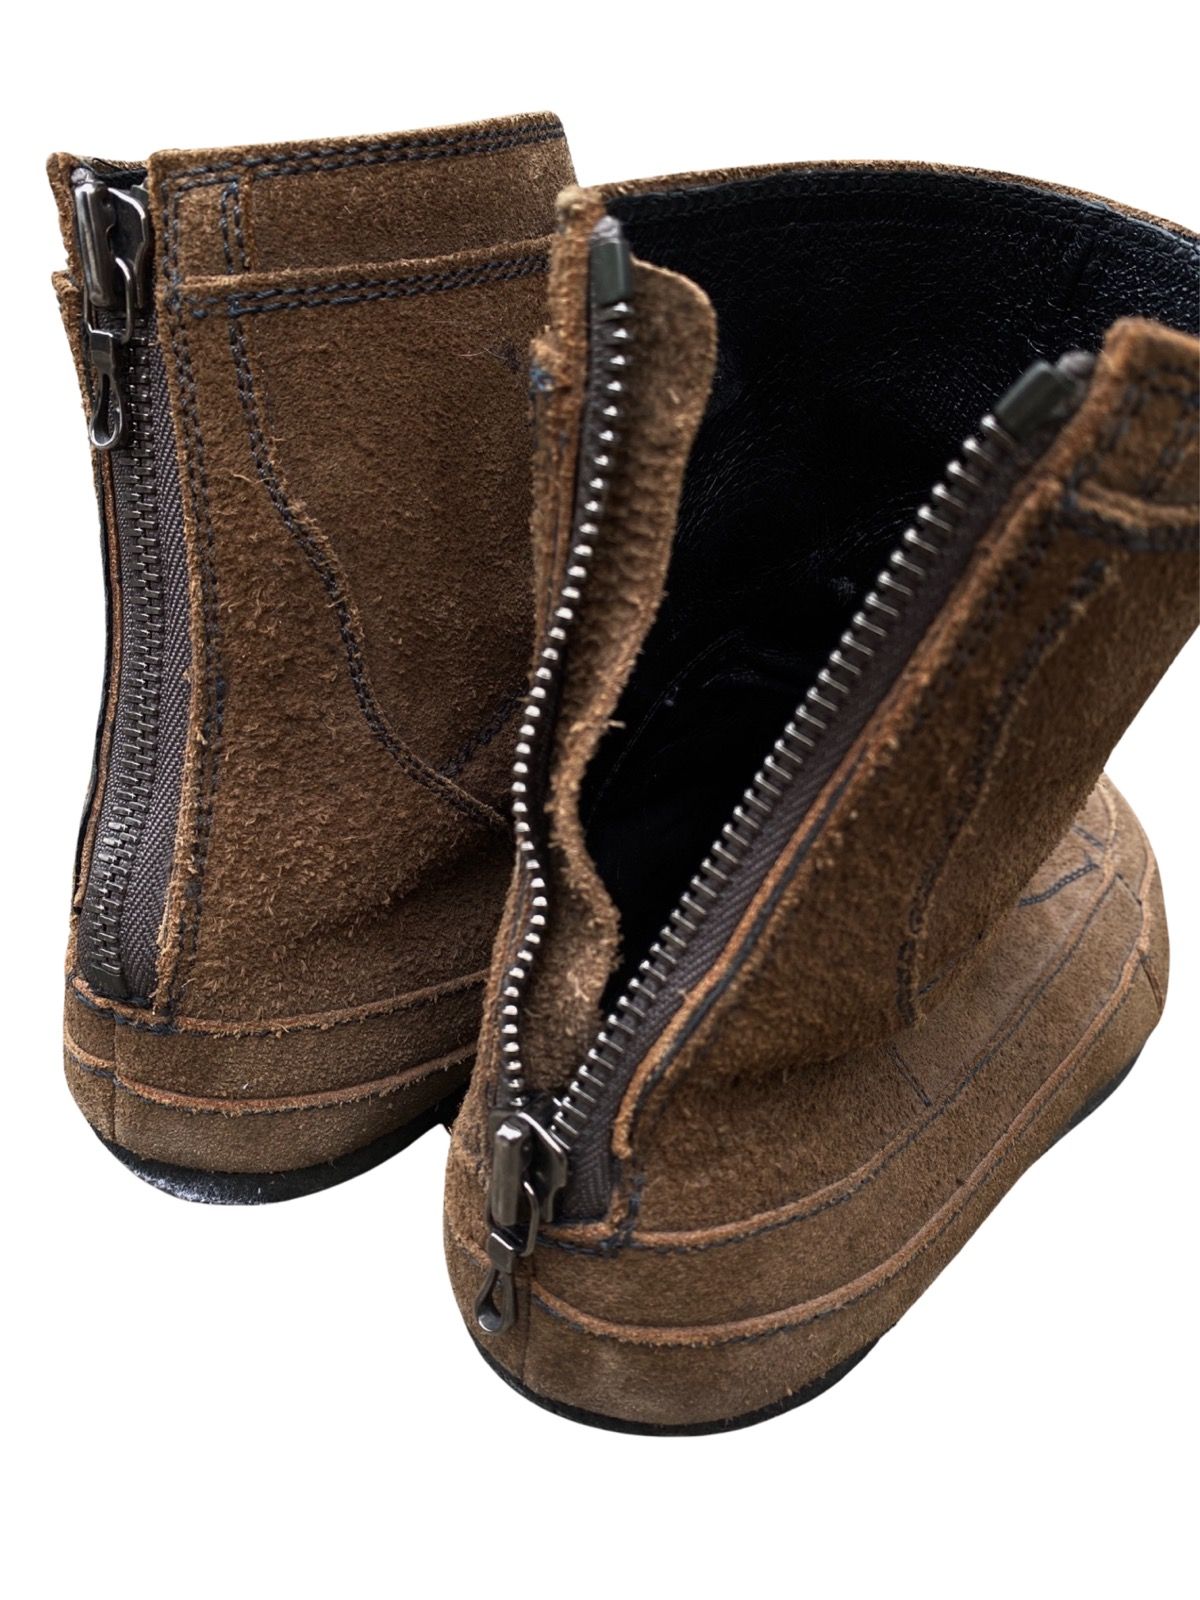 JULIUS_7 AW10 SUEDE LEATHER BACKZIP BOOTS - 8